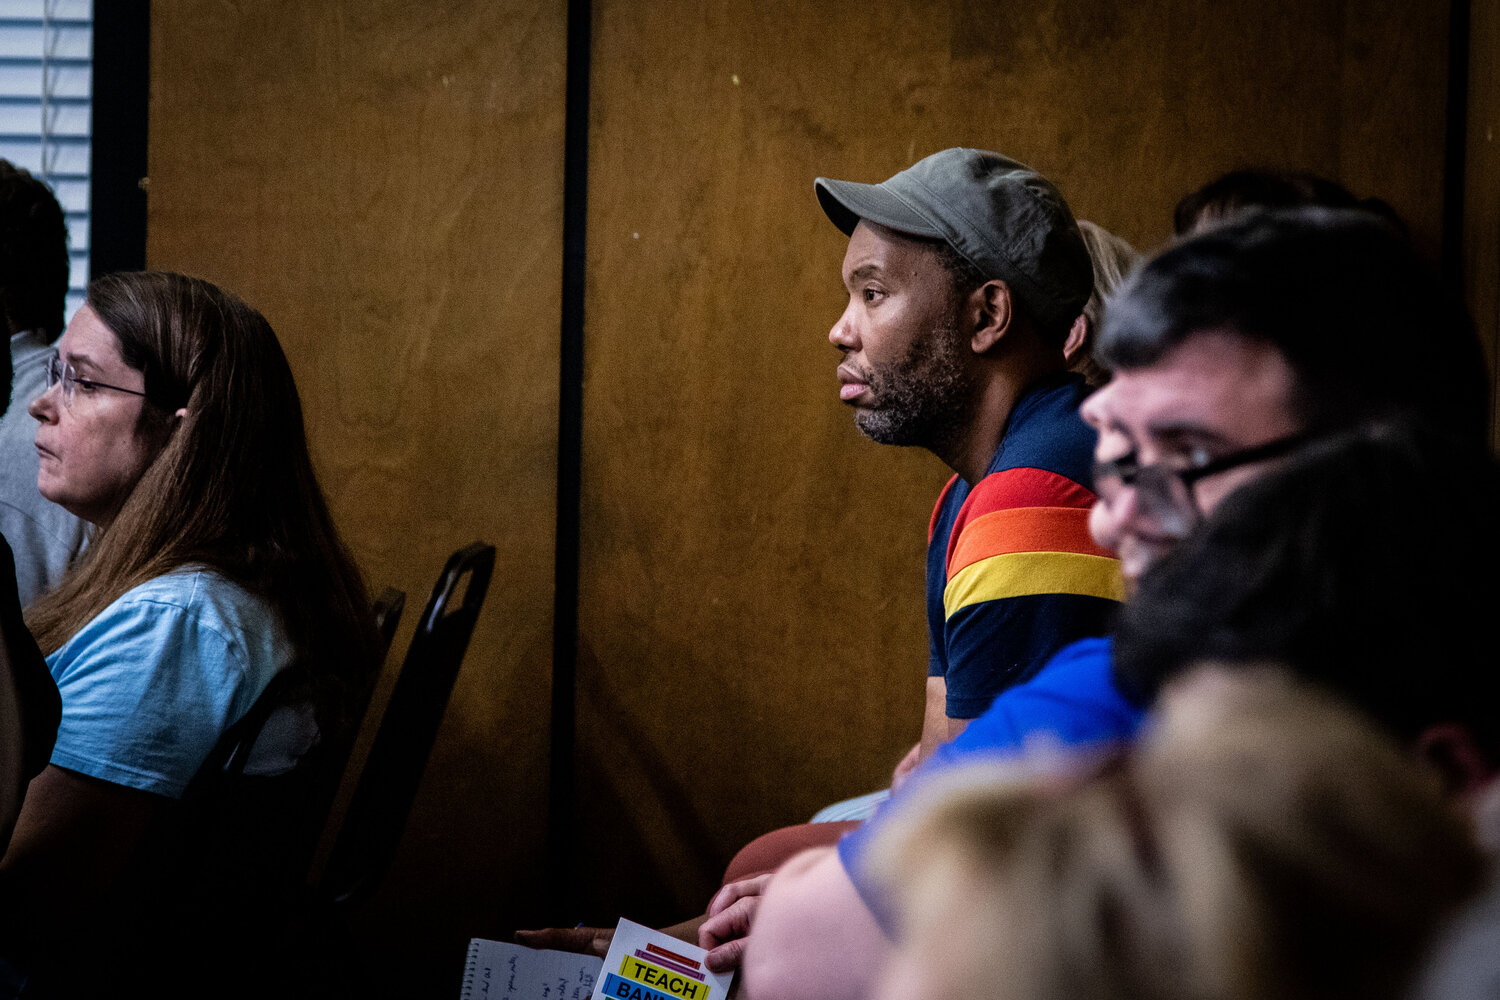 Ta-Nehisi Coates, whose “Between the World and Me” memoir was taught in a Chapin High School class that has become a topic of controversy, was in attendance at a July 17 Lexington-Richland District 5 School Board meeting.